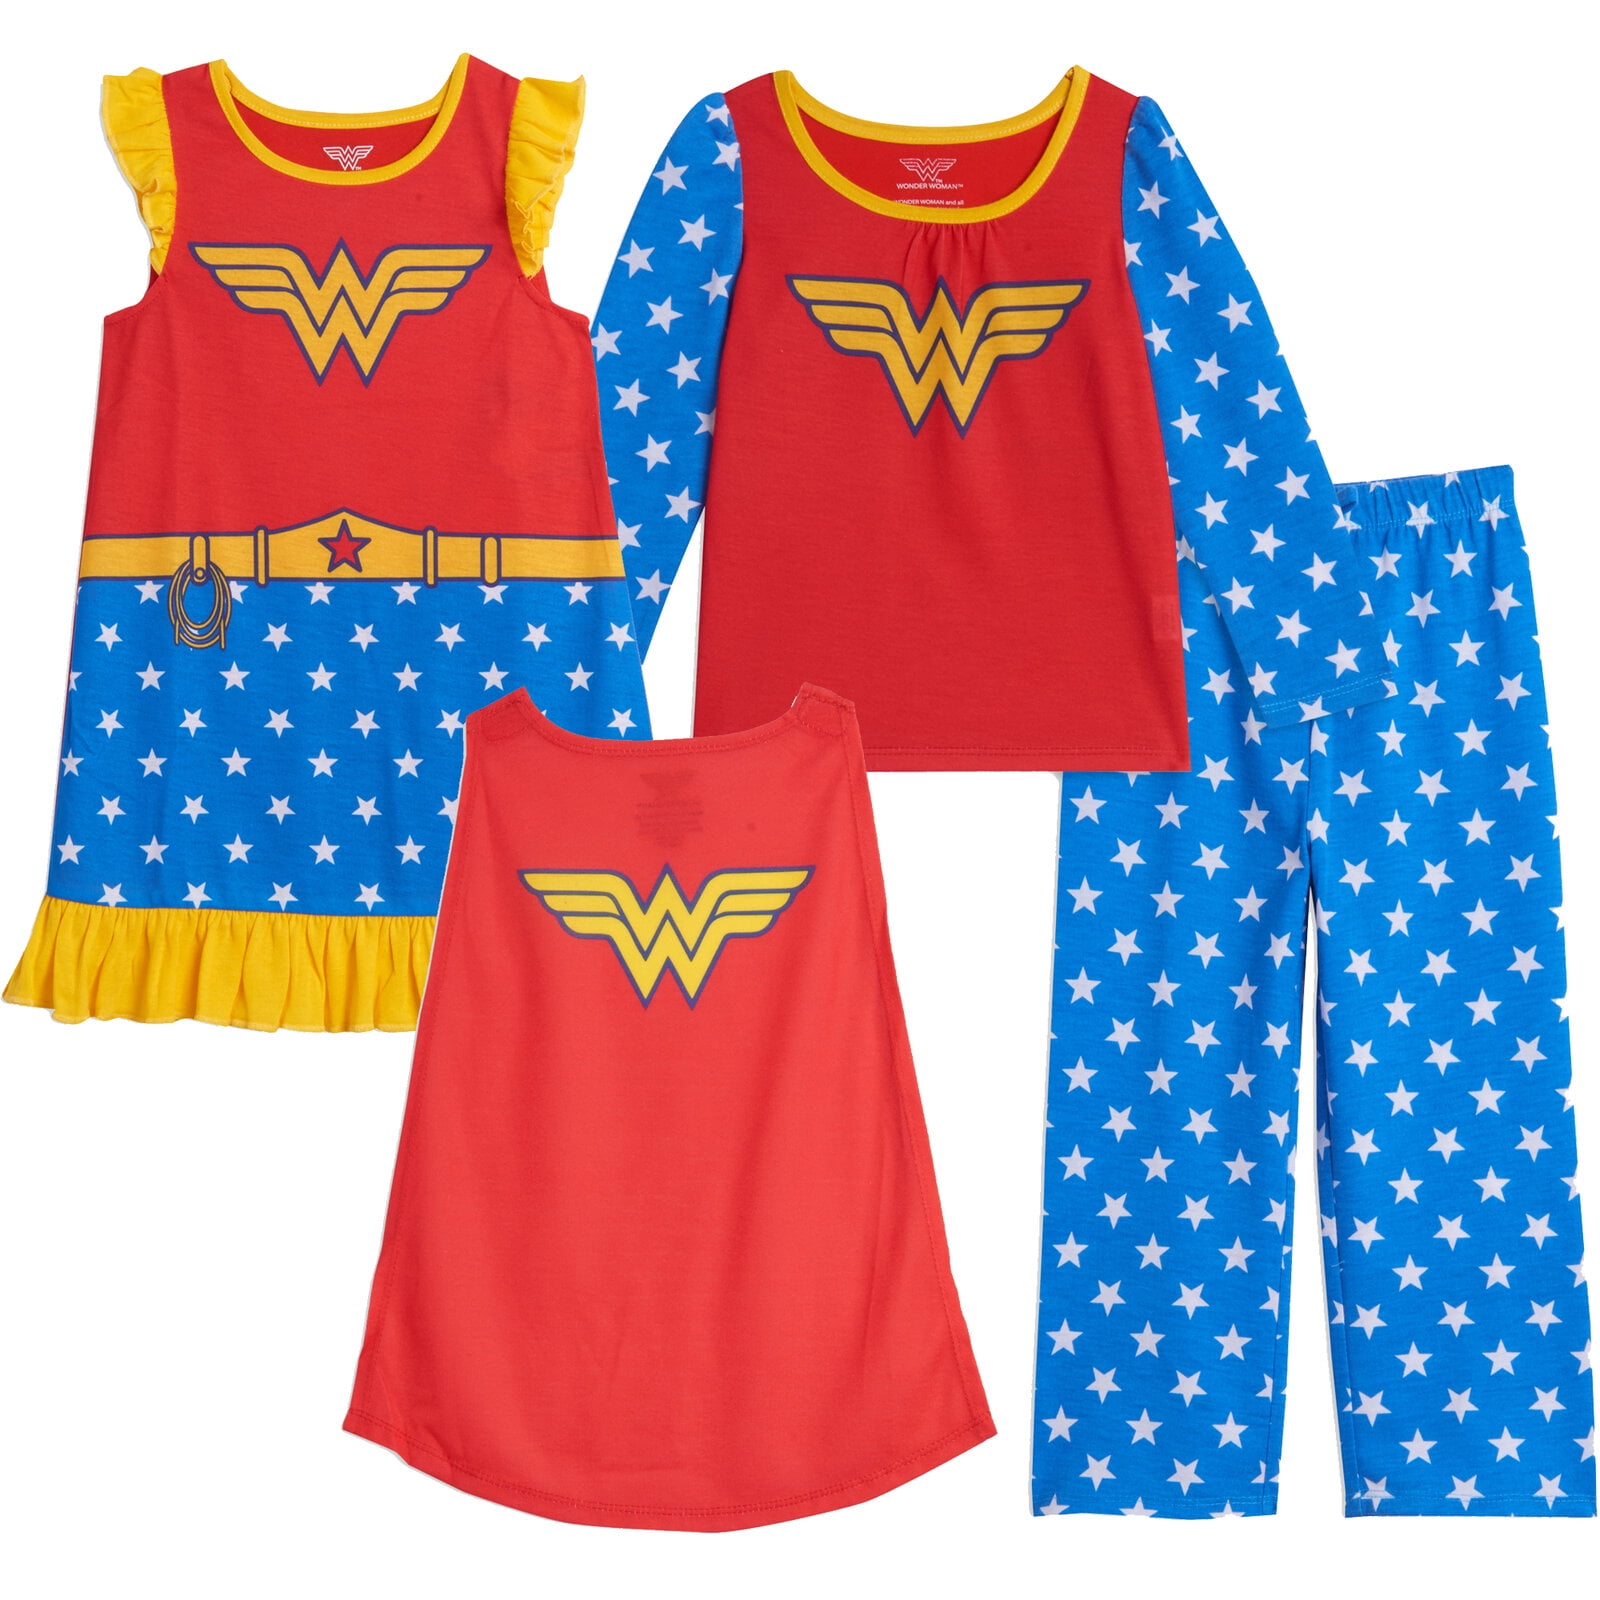 DC Comics Toddler Wonder Woman, Super Girl and More 7-Pack Training Pants,  Justice League, 3T 